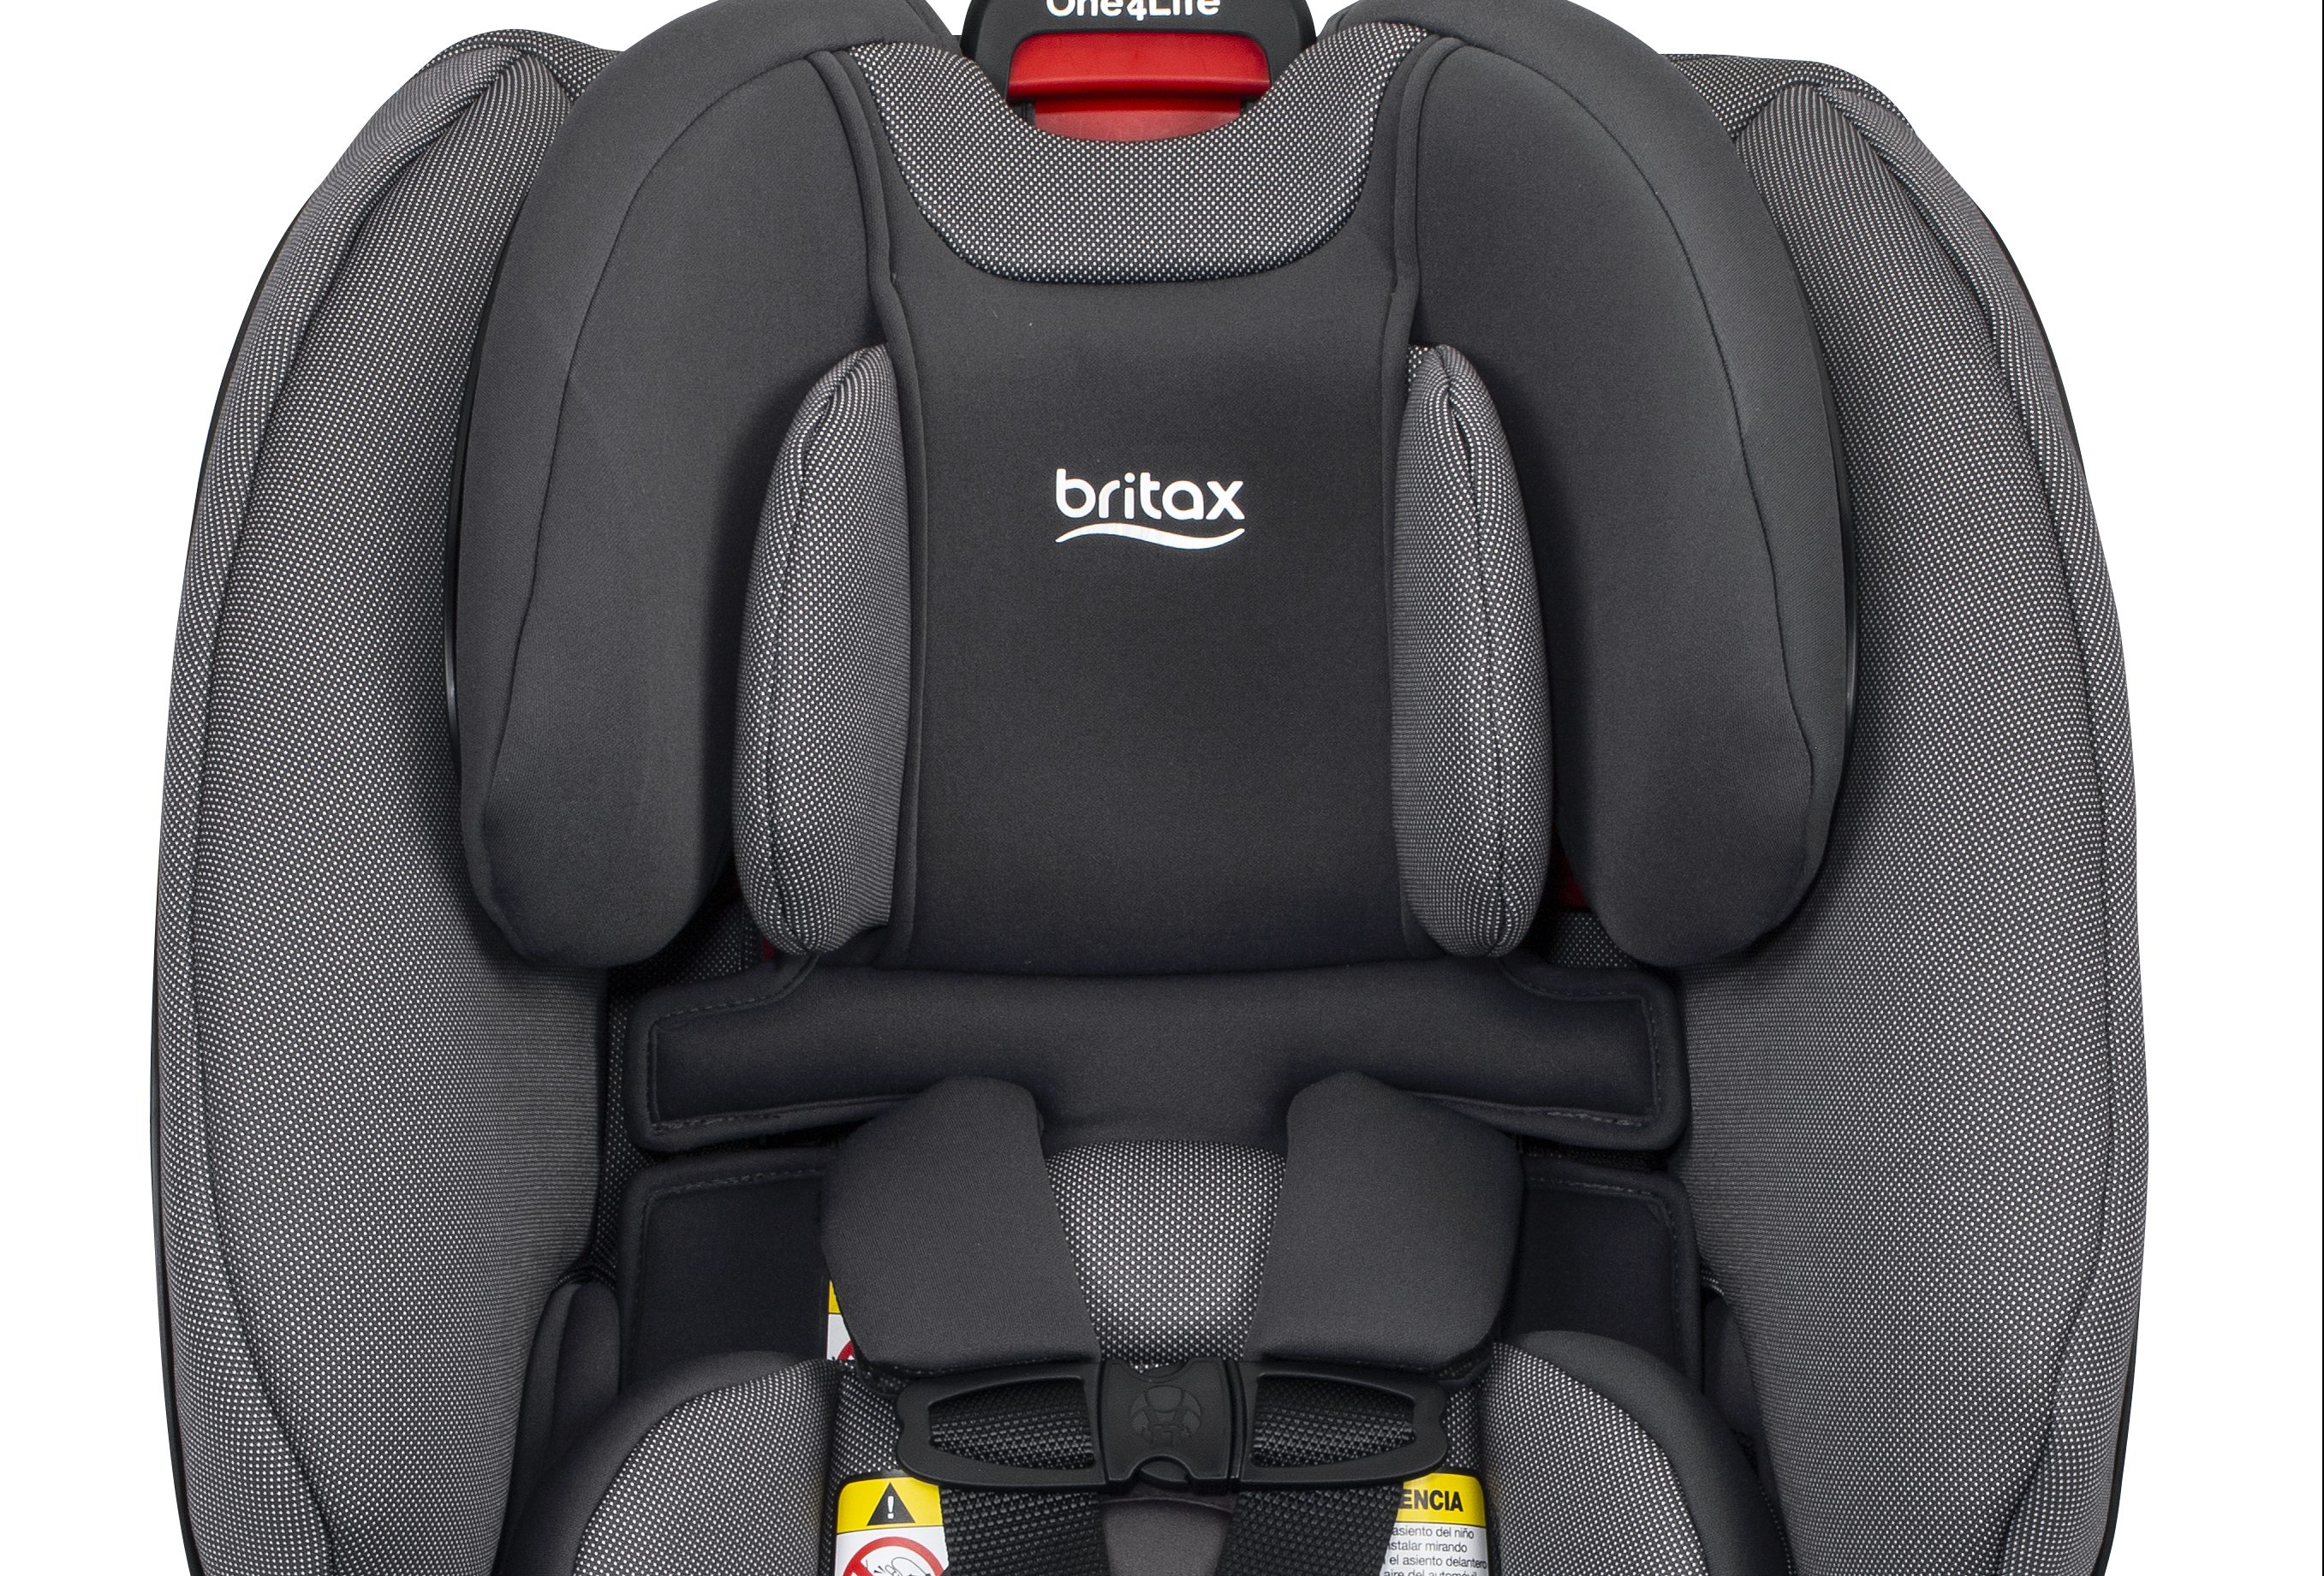 Britax Just Introduced Its First All In One Car Seat,1 12 Scale Dollhouse Miniatures